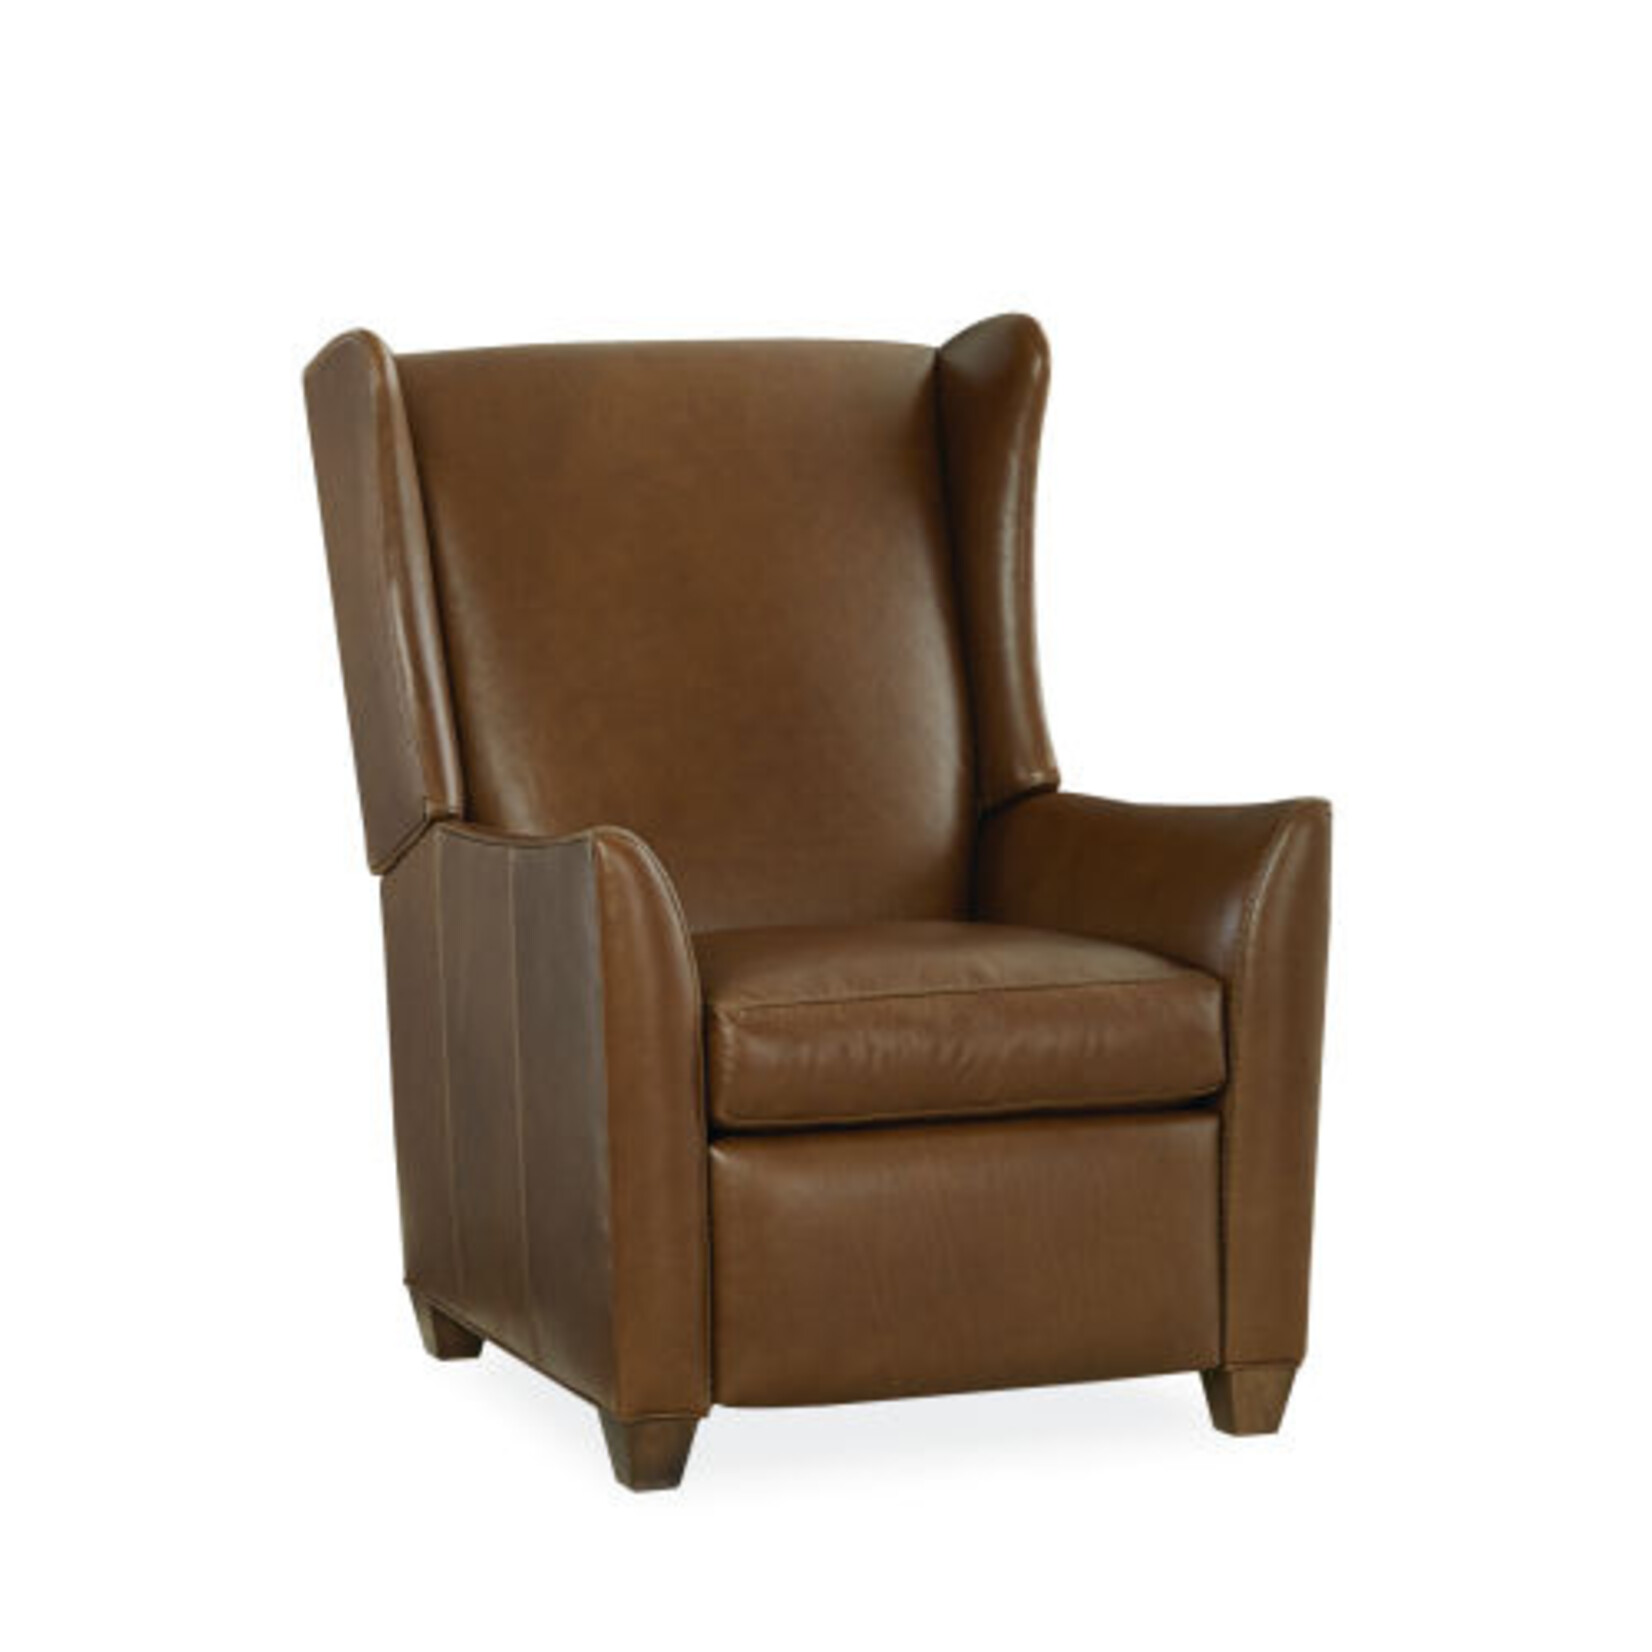 1822 Leather Relaxor - Chaps Toffee